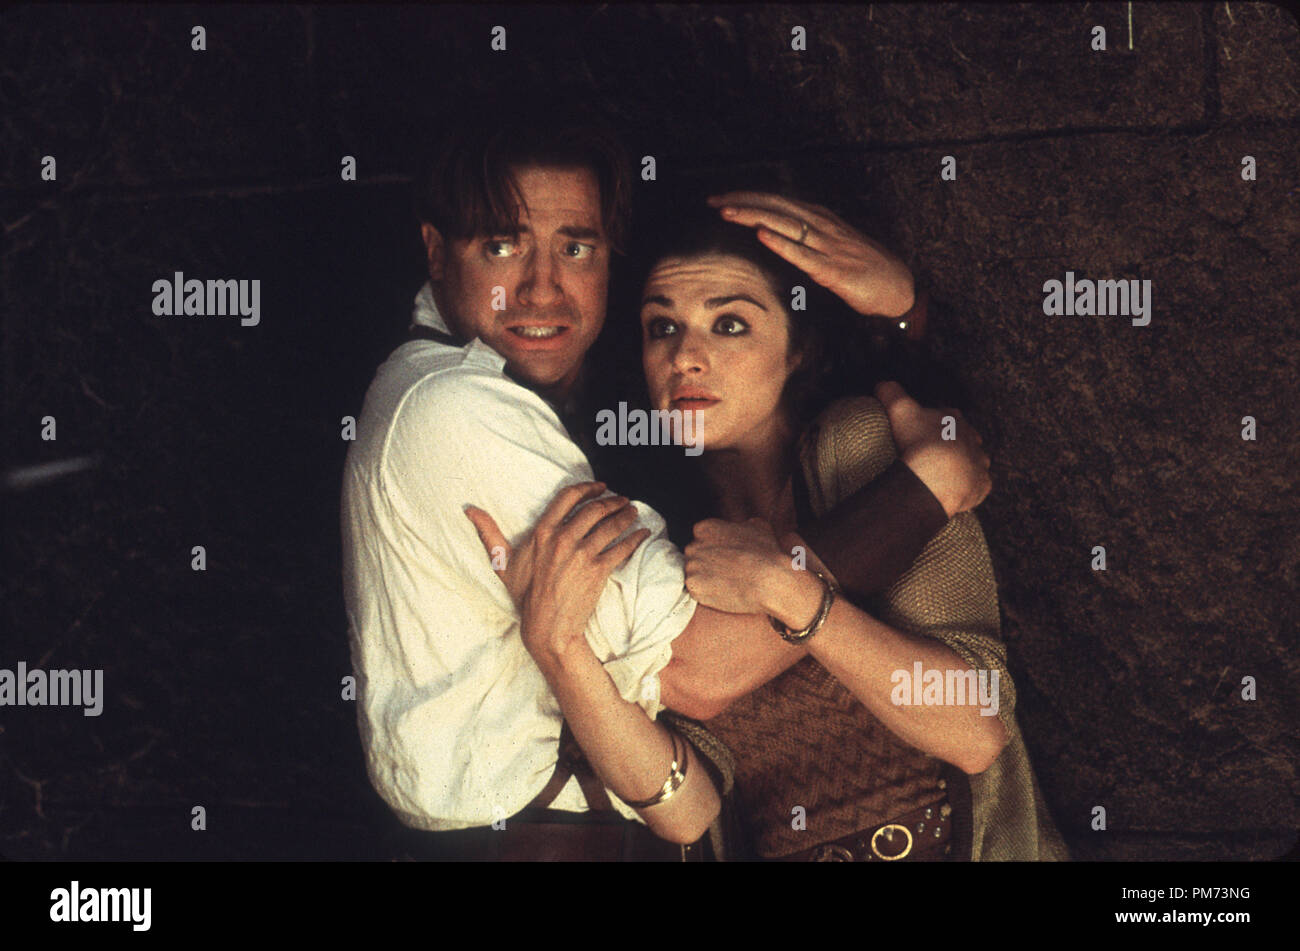 Film Still / Publicity Still from 'The Mummy Returns' Brendan Fraser, Rachel Weisz © 2001 Universal Photo credit: Keith Hamshere  File Reference # 30847170THA  For Editorial Use Only -  All Rights Reserved Stock Photo